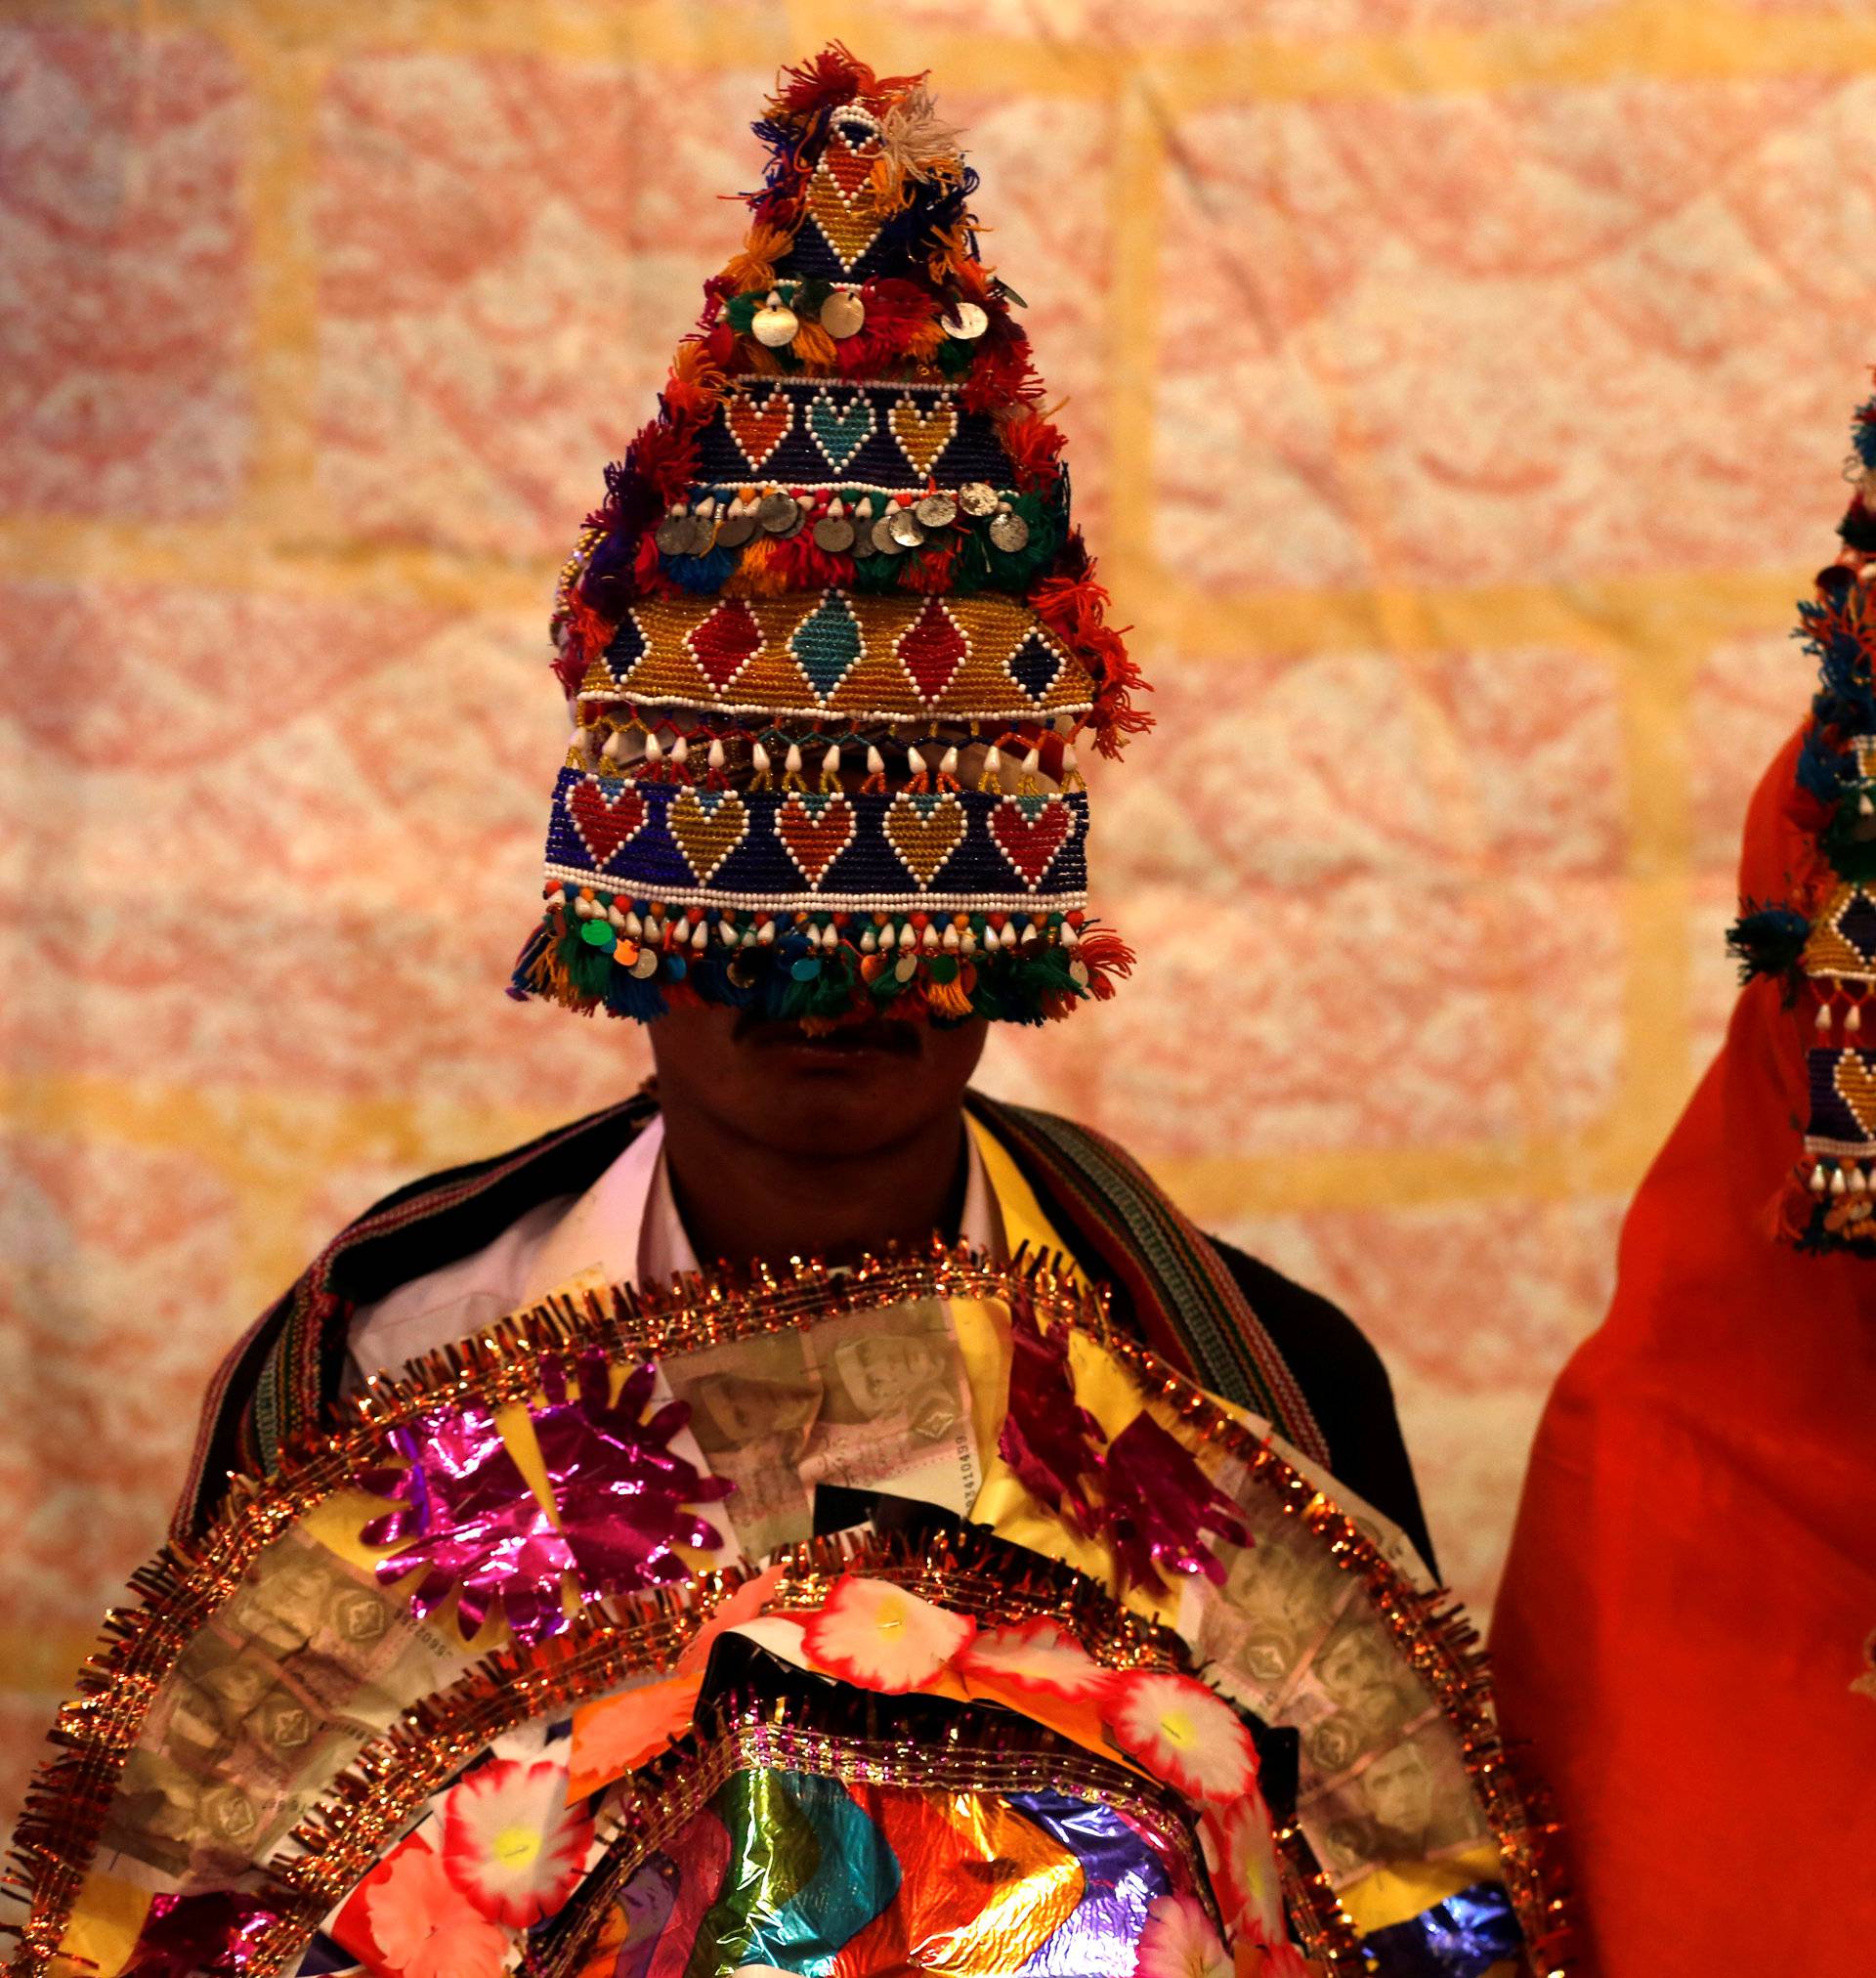 A bride and groom wearing traditional handmade garlands wait for their wedding to start during a mass marriage ceremony in Karachi